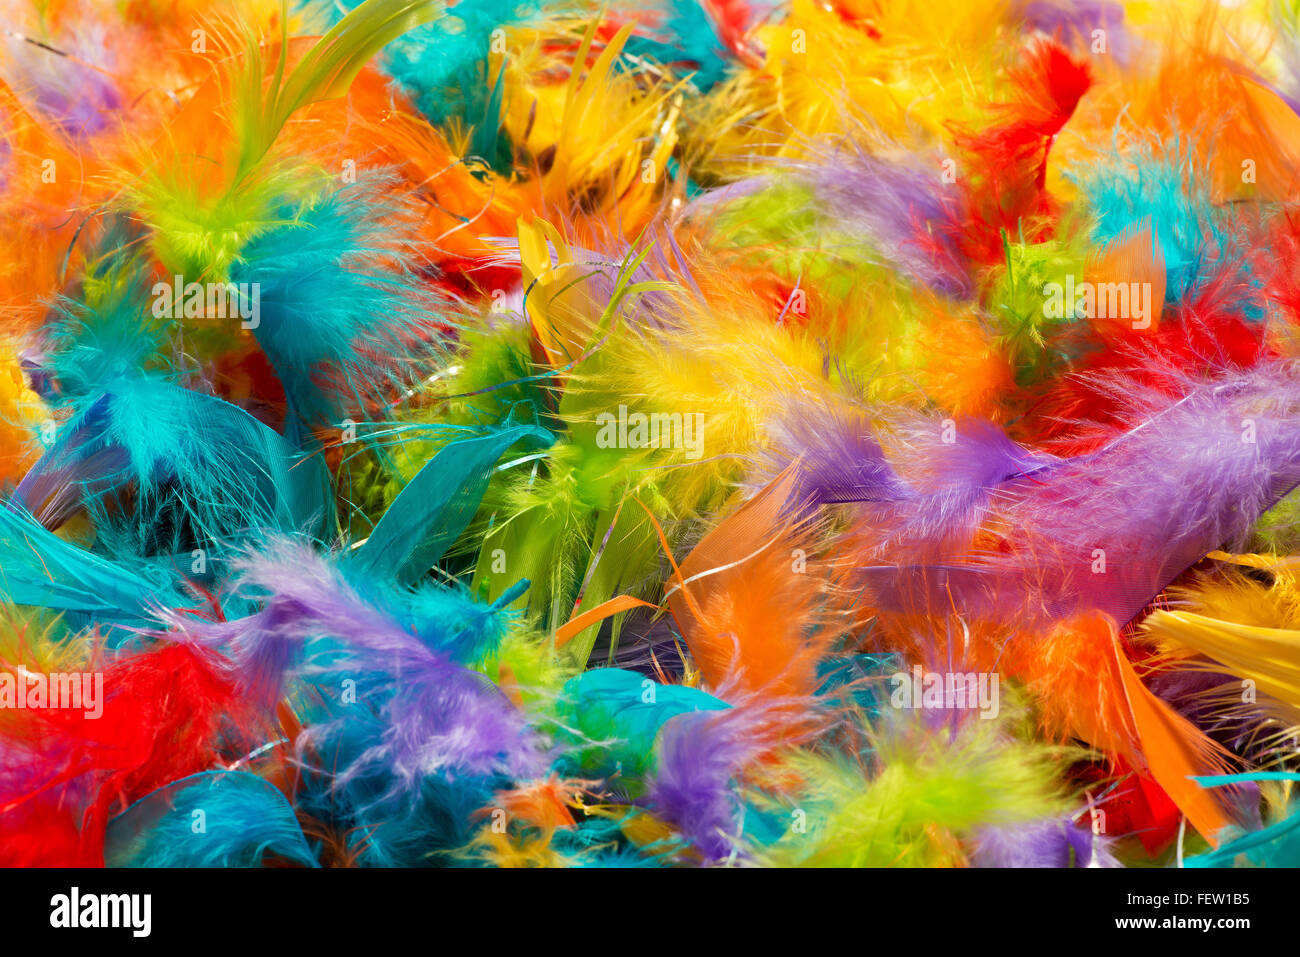 Soft fluffy brightly colored bird feathers background texture in the colors of the rainbow Stock Photo